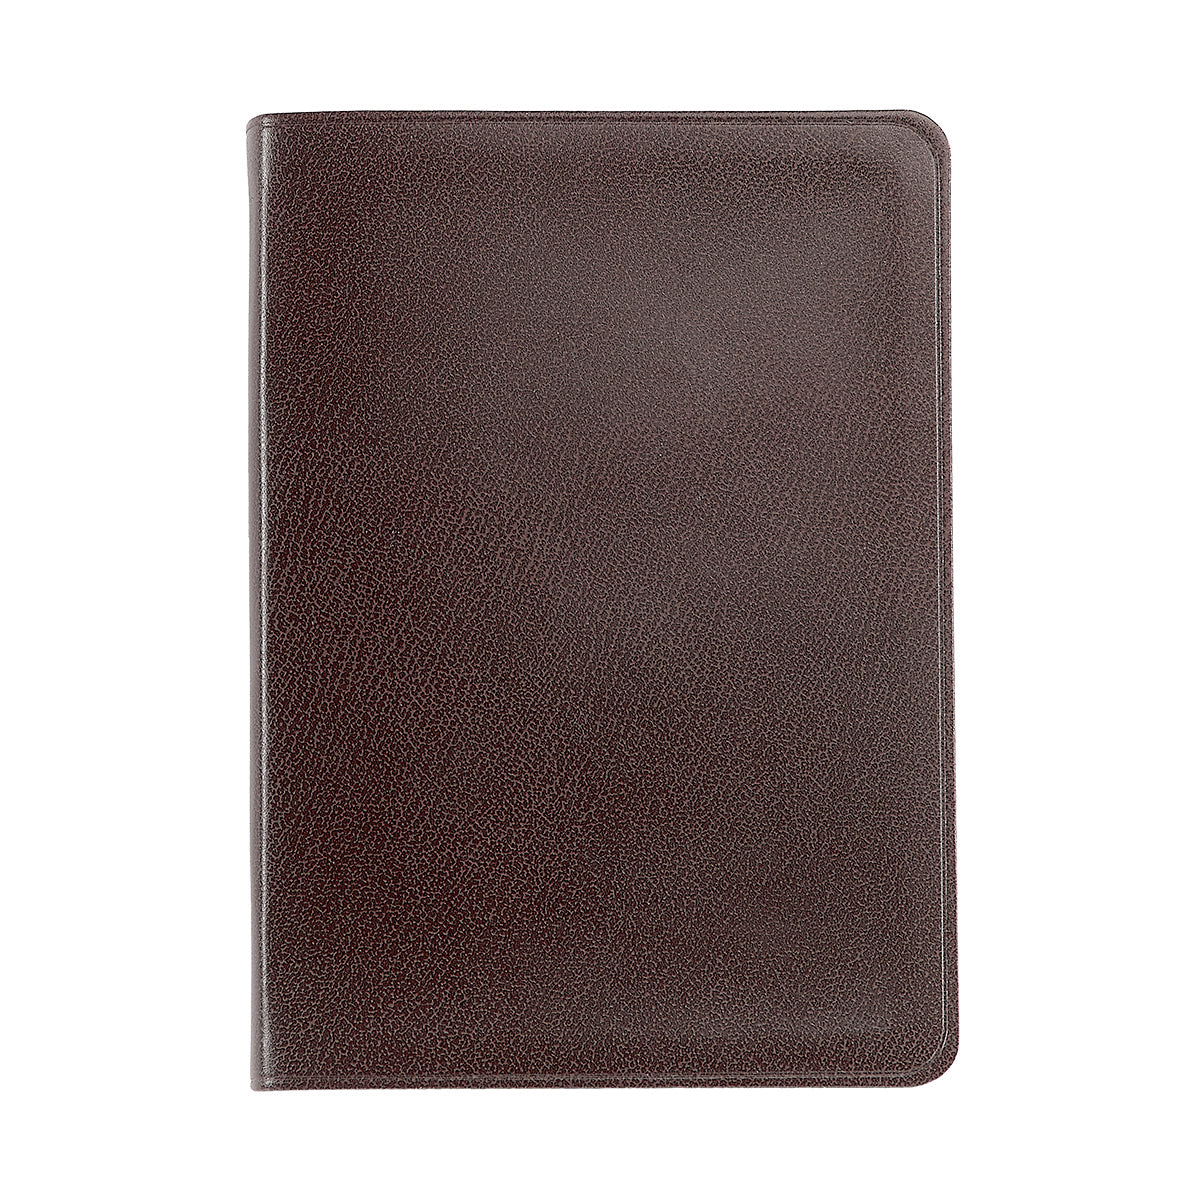 Graphic Image Medium Travel Journal Brown Embossed Leather